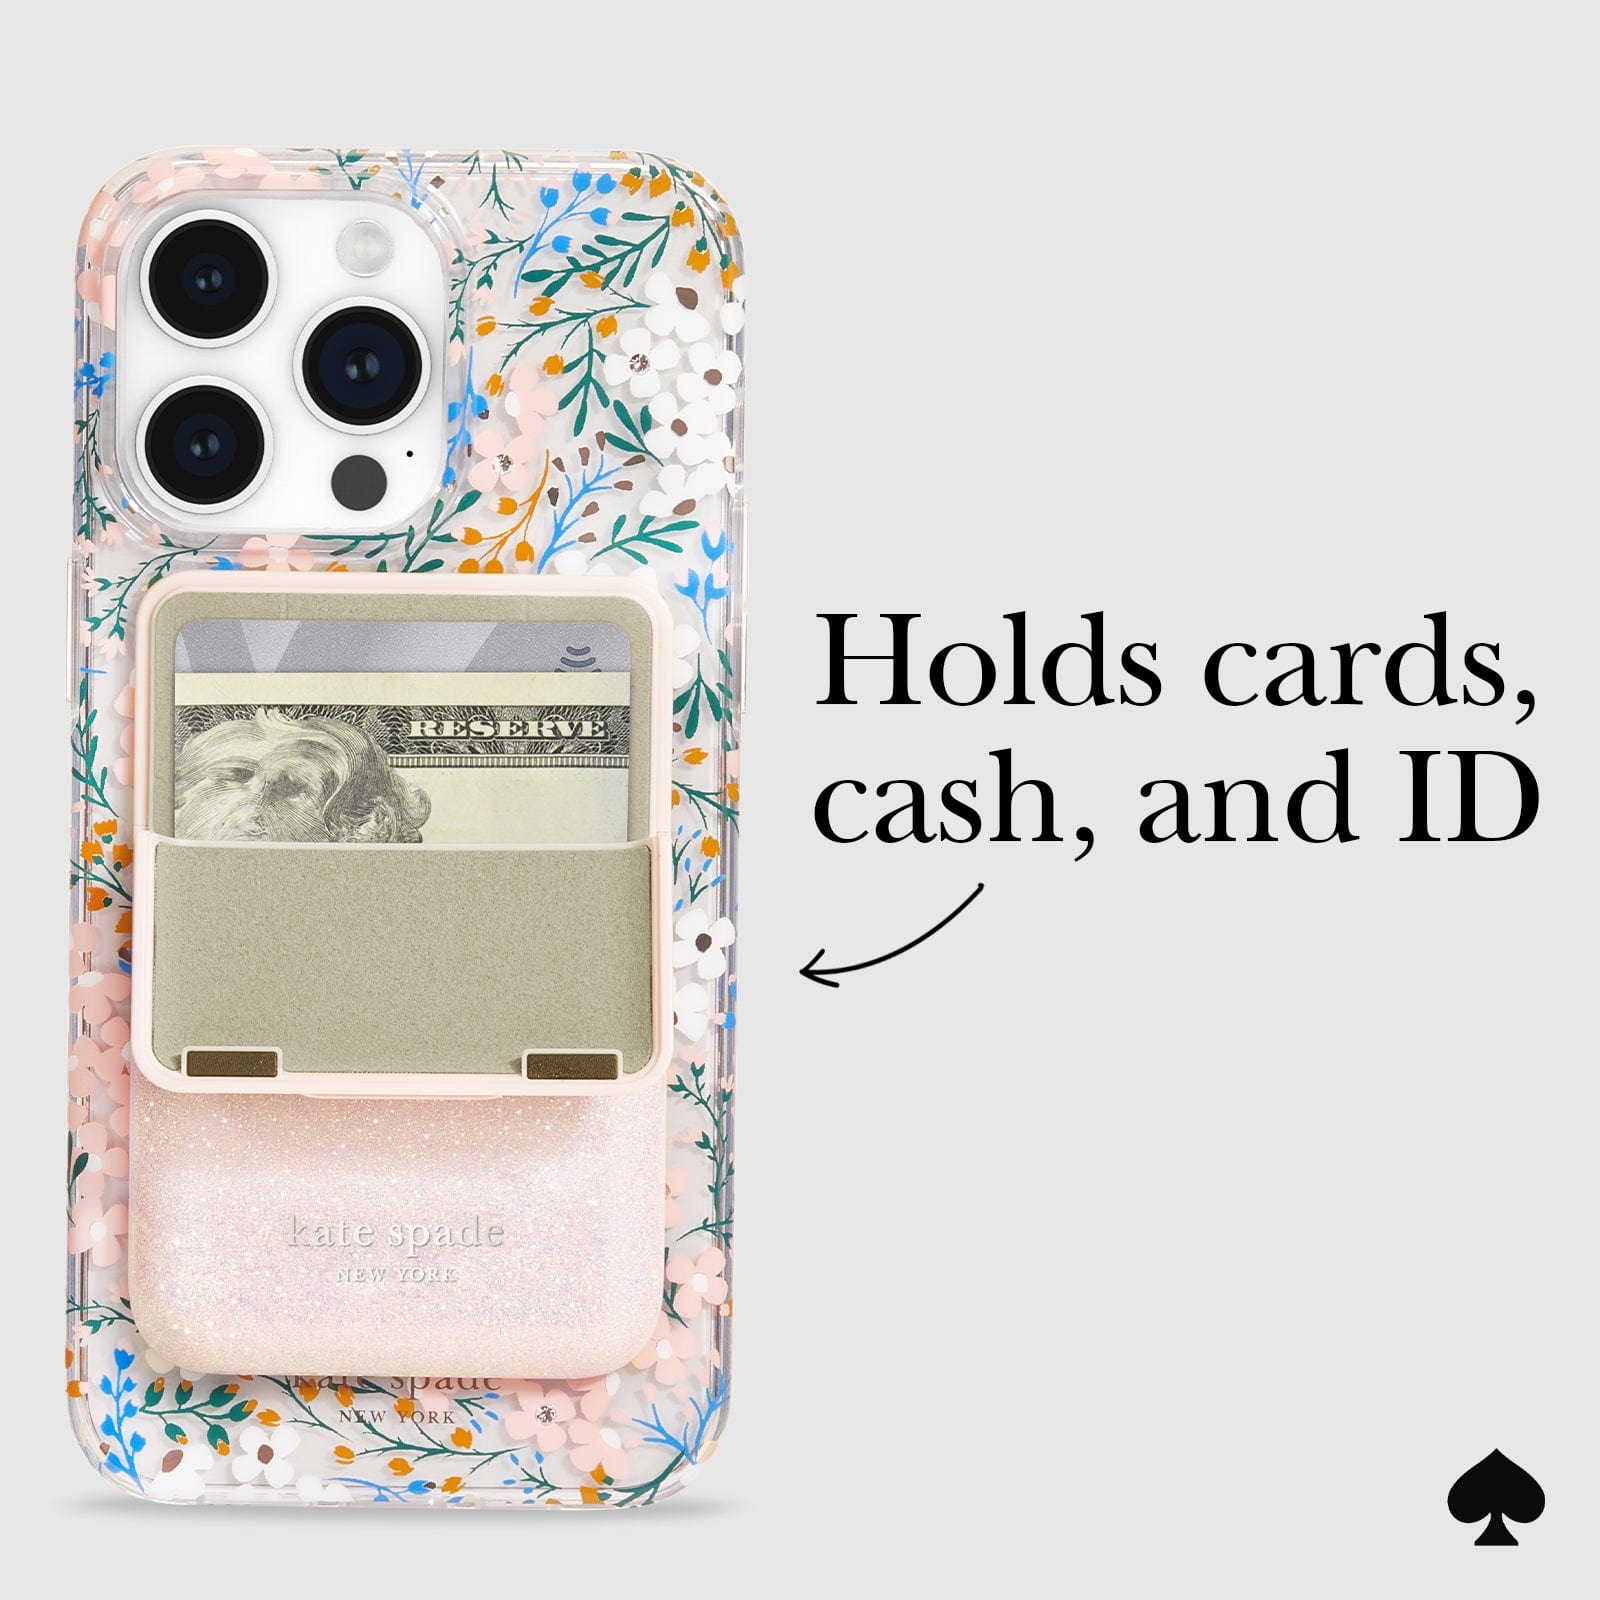 HOLDS CARDS, CASH, AND ID